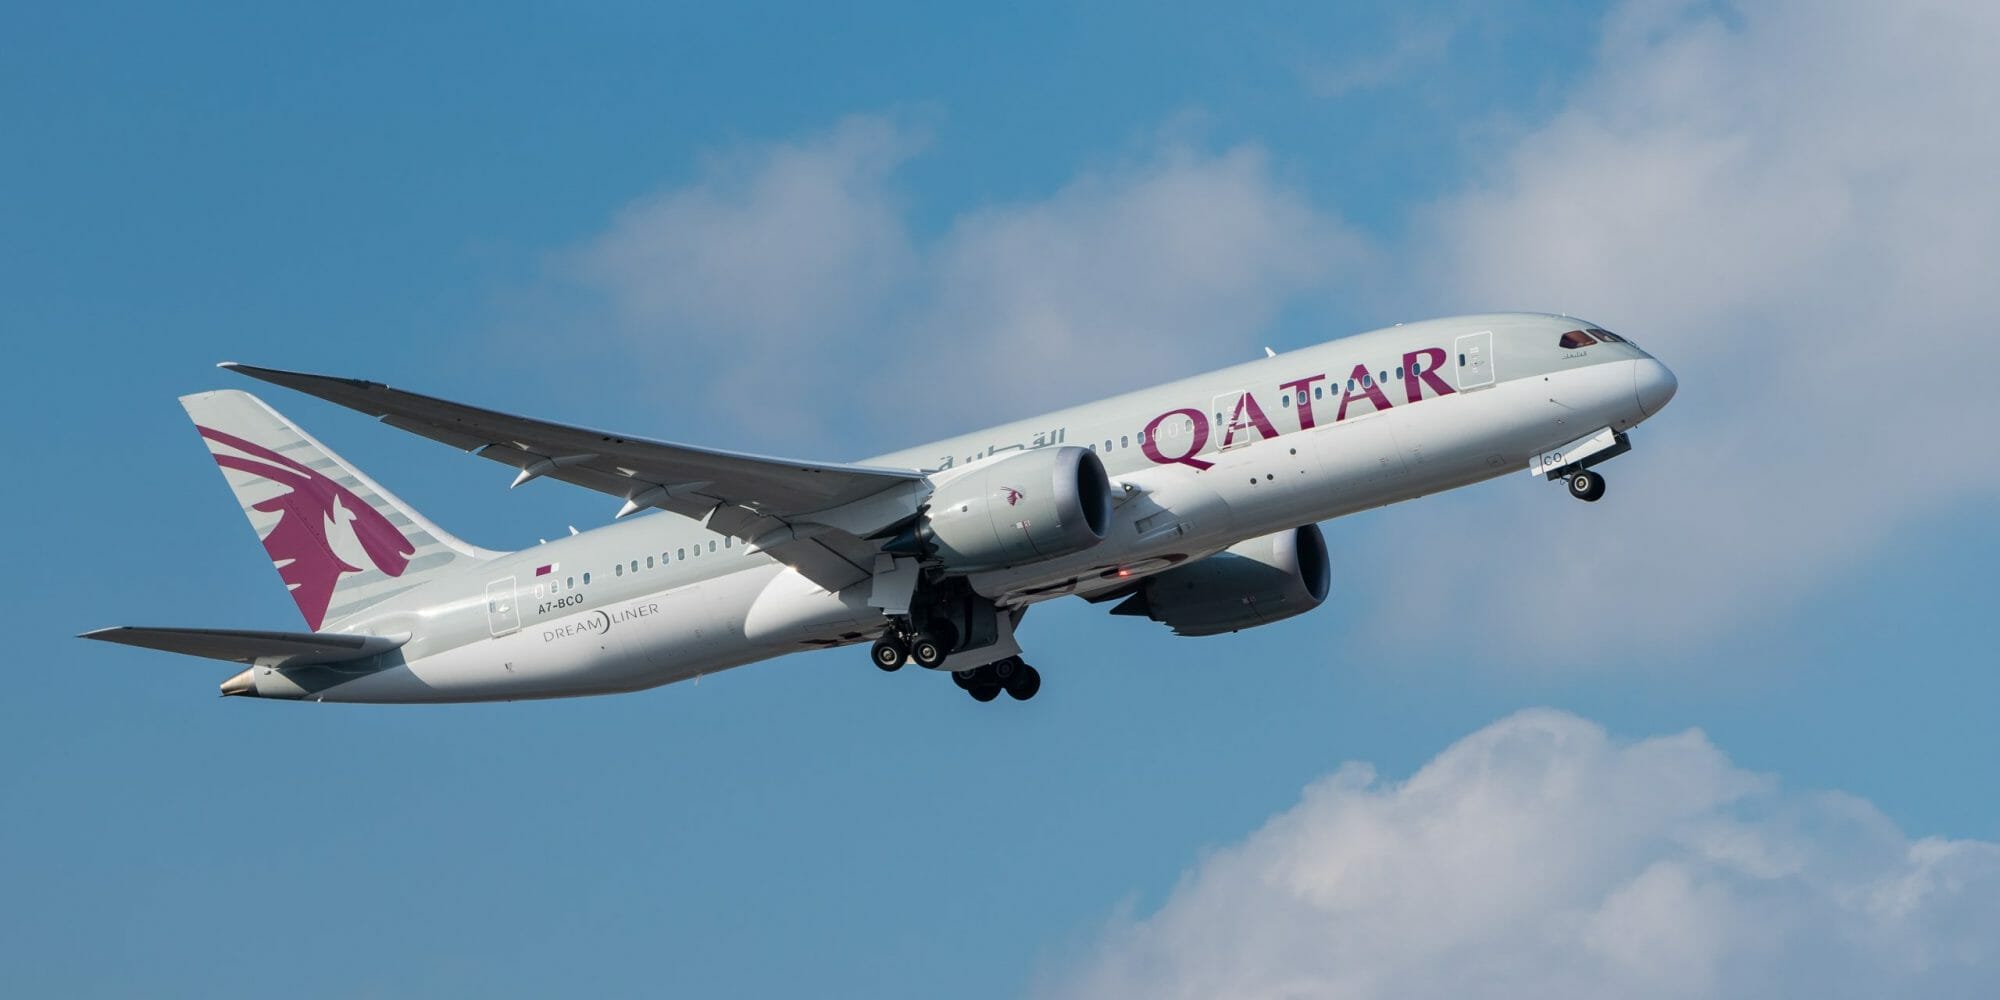 Qatar Airways executive assures no more intrusive gynecological exams on passengers